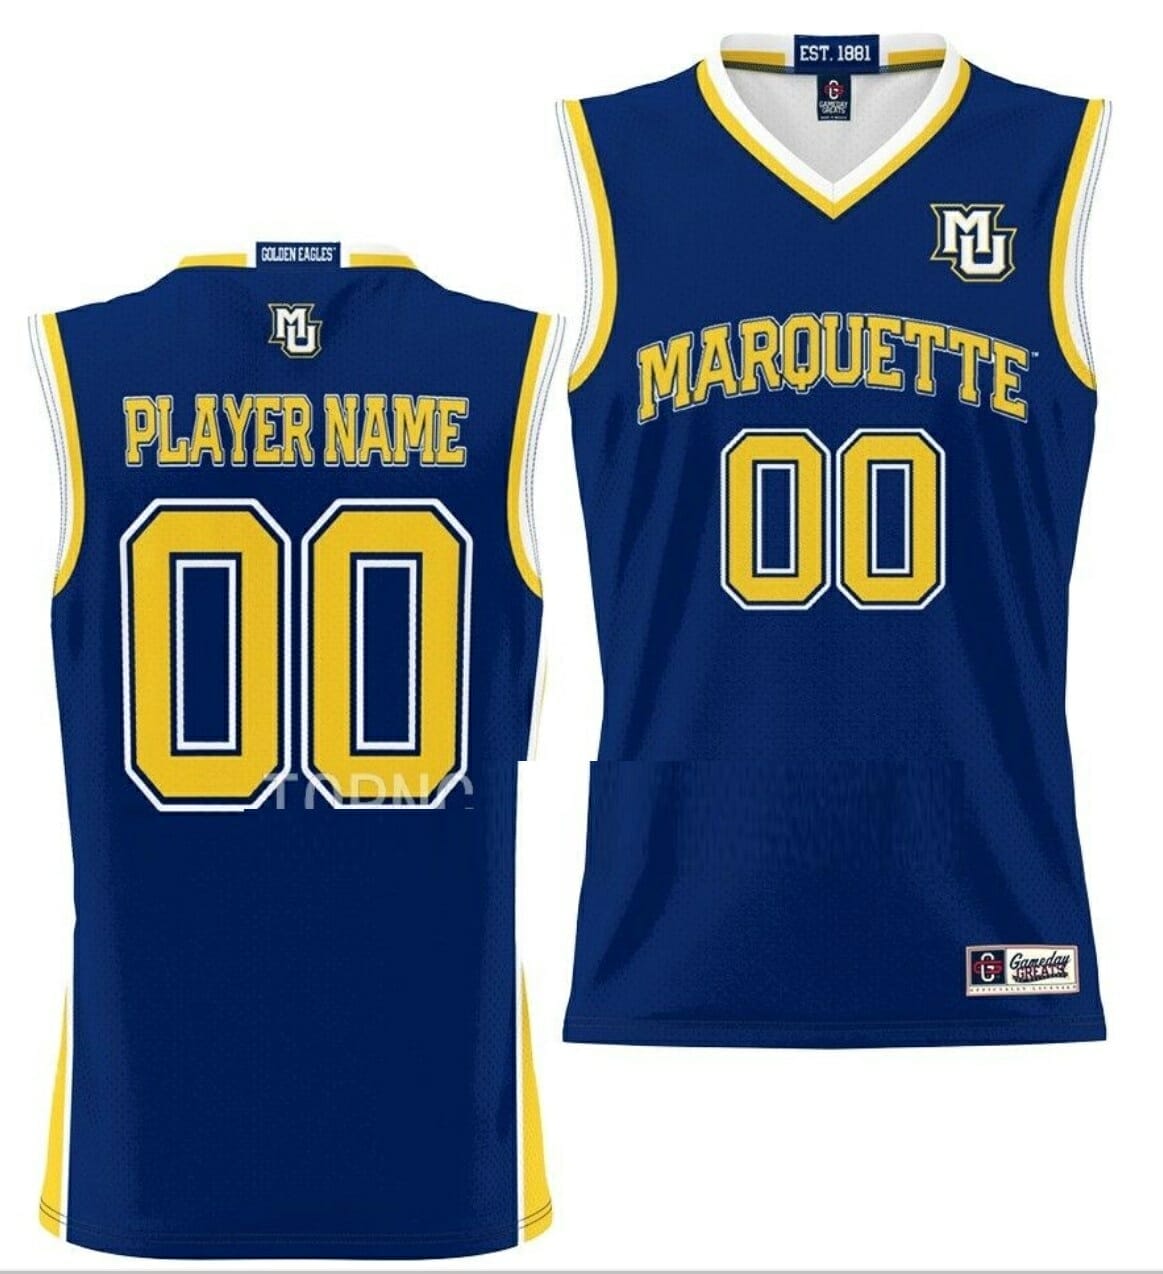 Available] New Custom Marquette Golden Eagles Jersey Blue